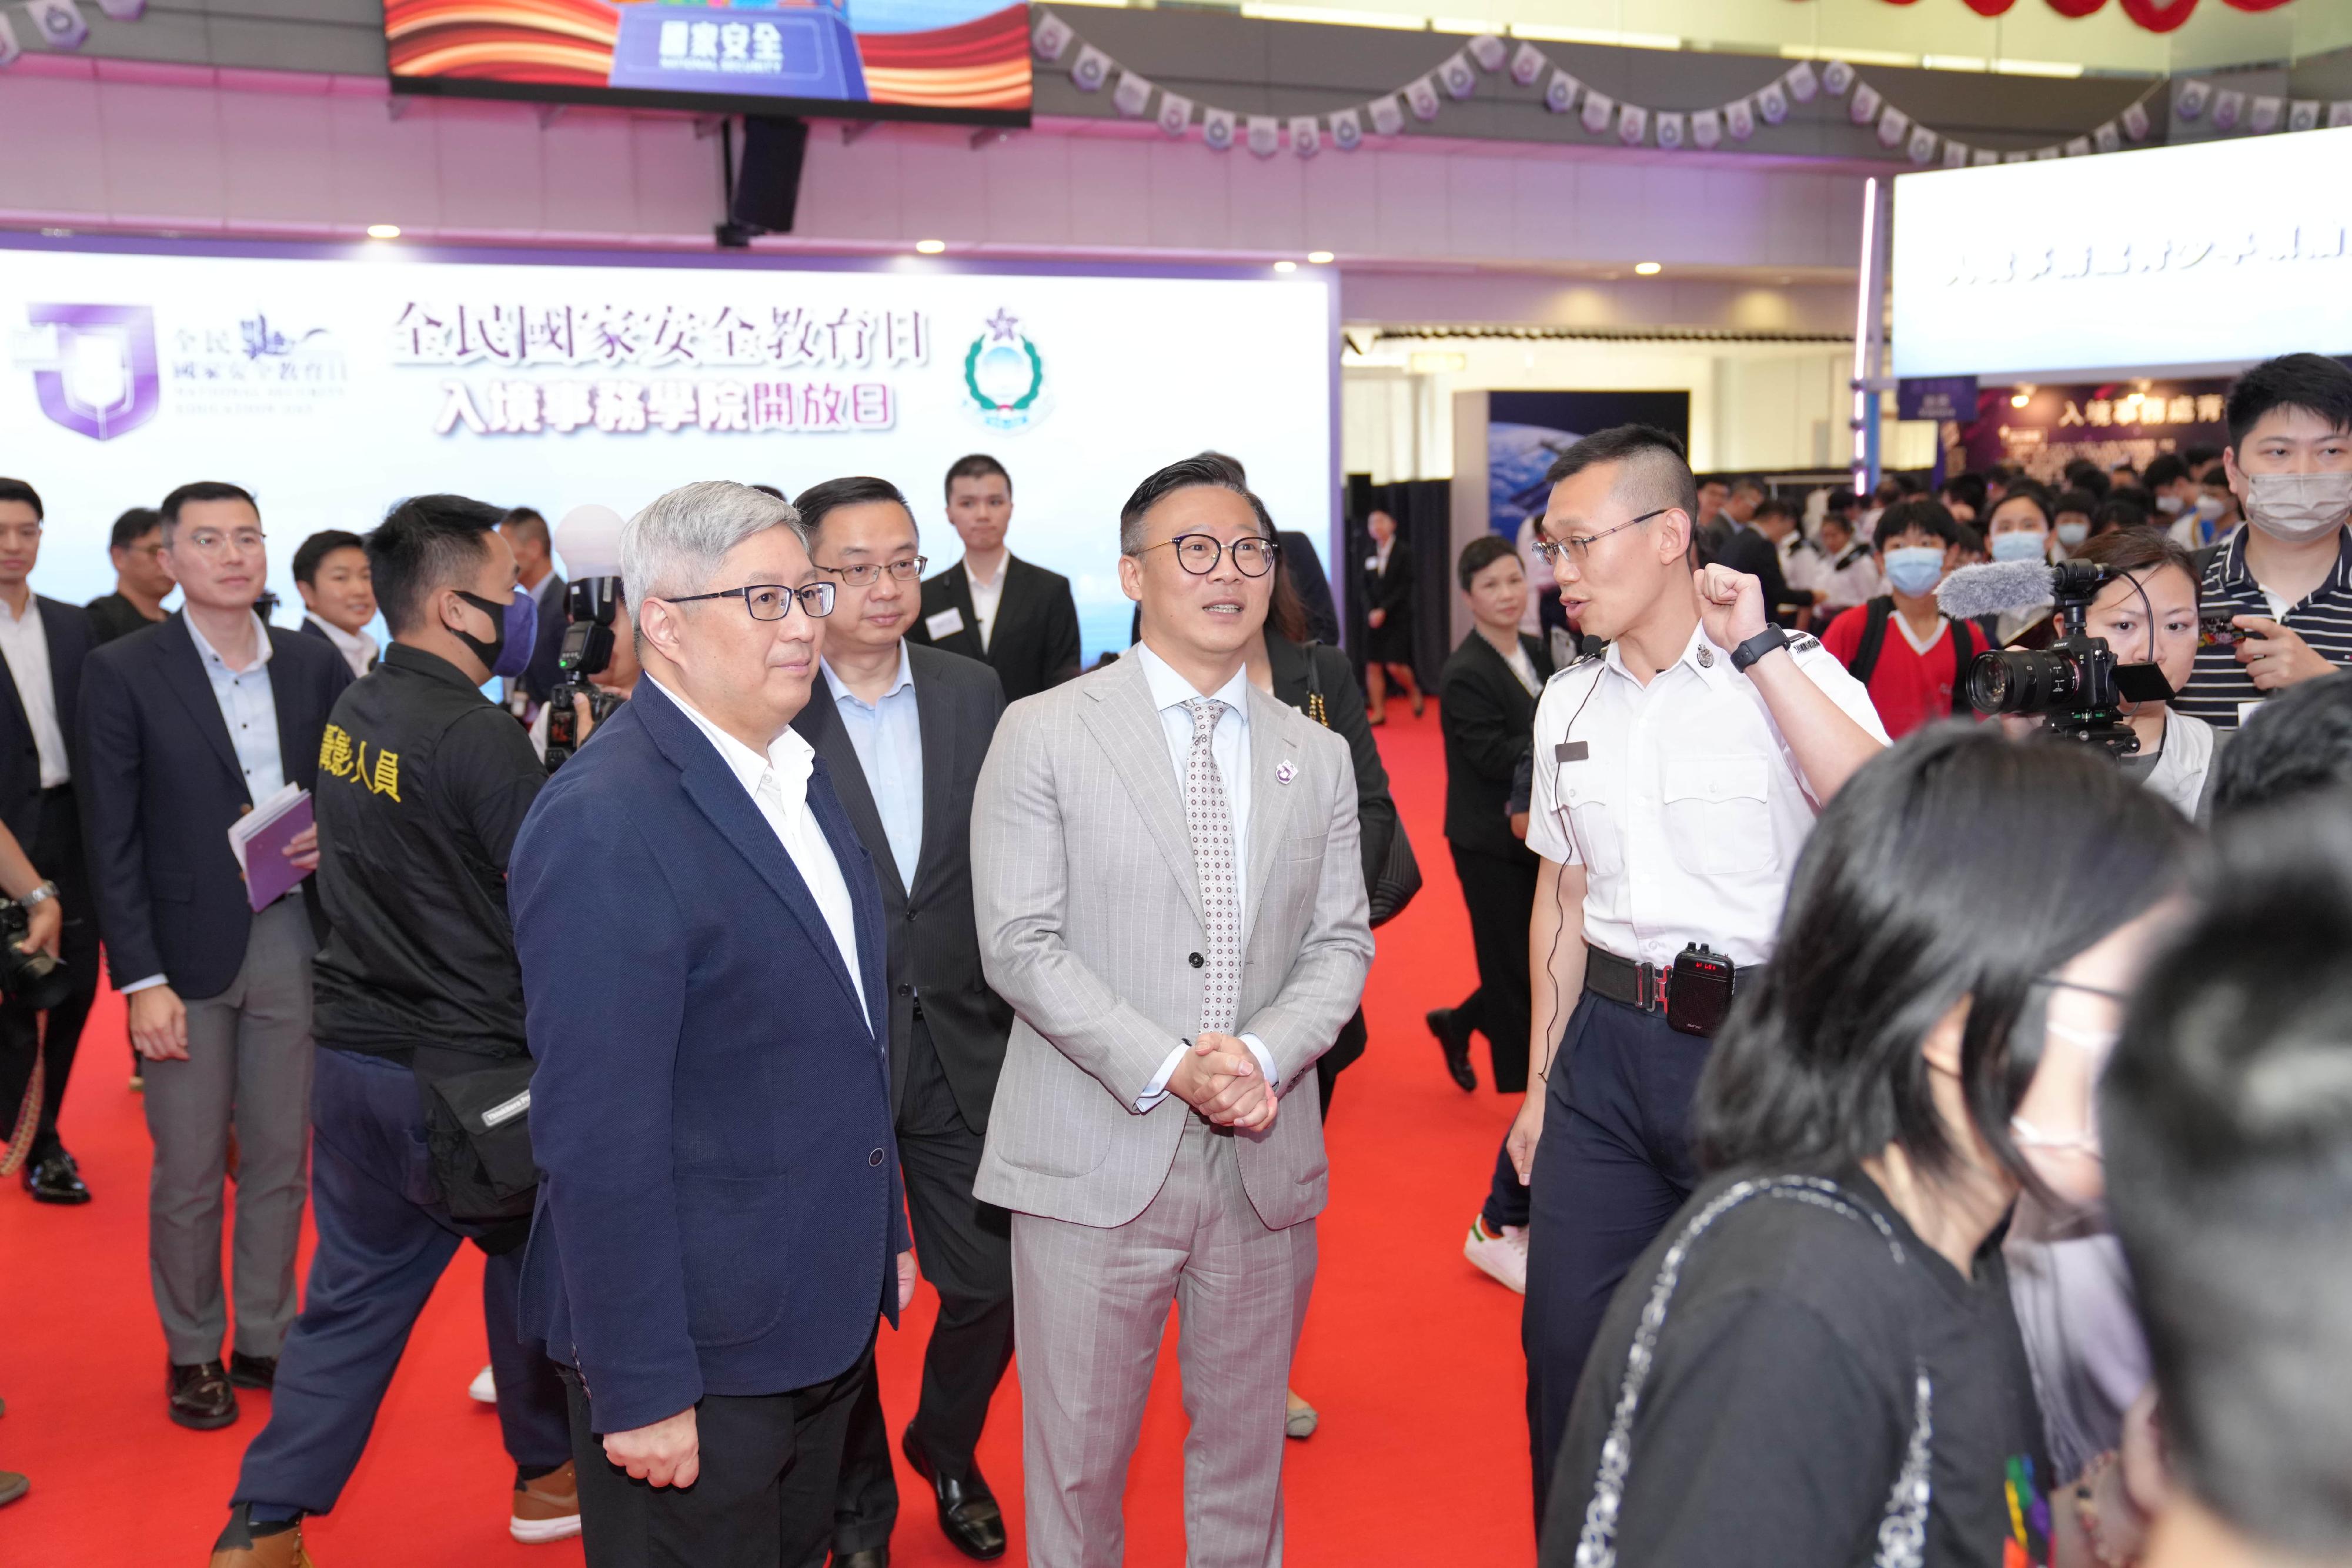 To support the National Security Education Day, the Immigration Service Institute of Training and Development held an open day today (April 15). Photo shows the Deputy Secretary for Justice, Mr Cheung Kwok-kwan (front row, centre), accompanied by the Director of Immigration, Mr Au Ka-wang (front row, left), visiting an exhibition booth.